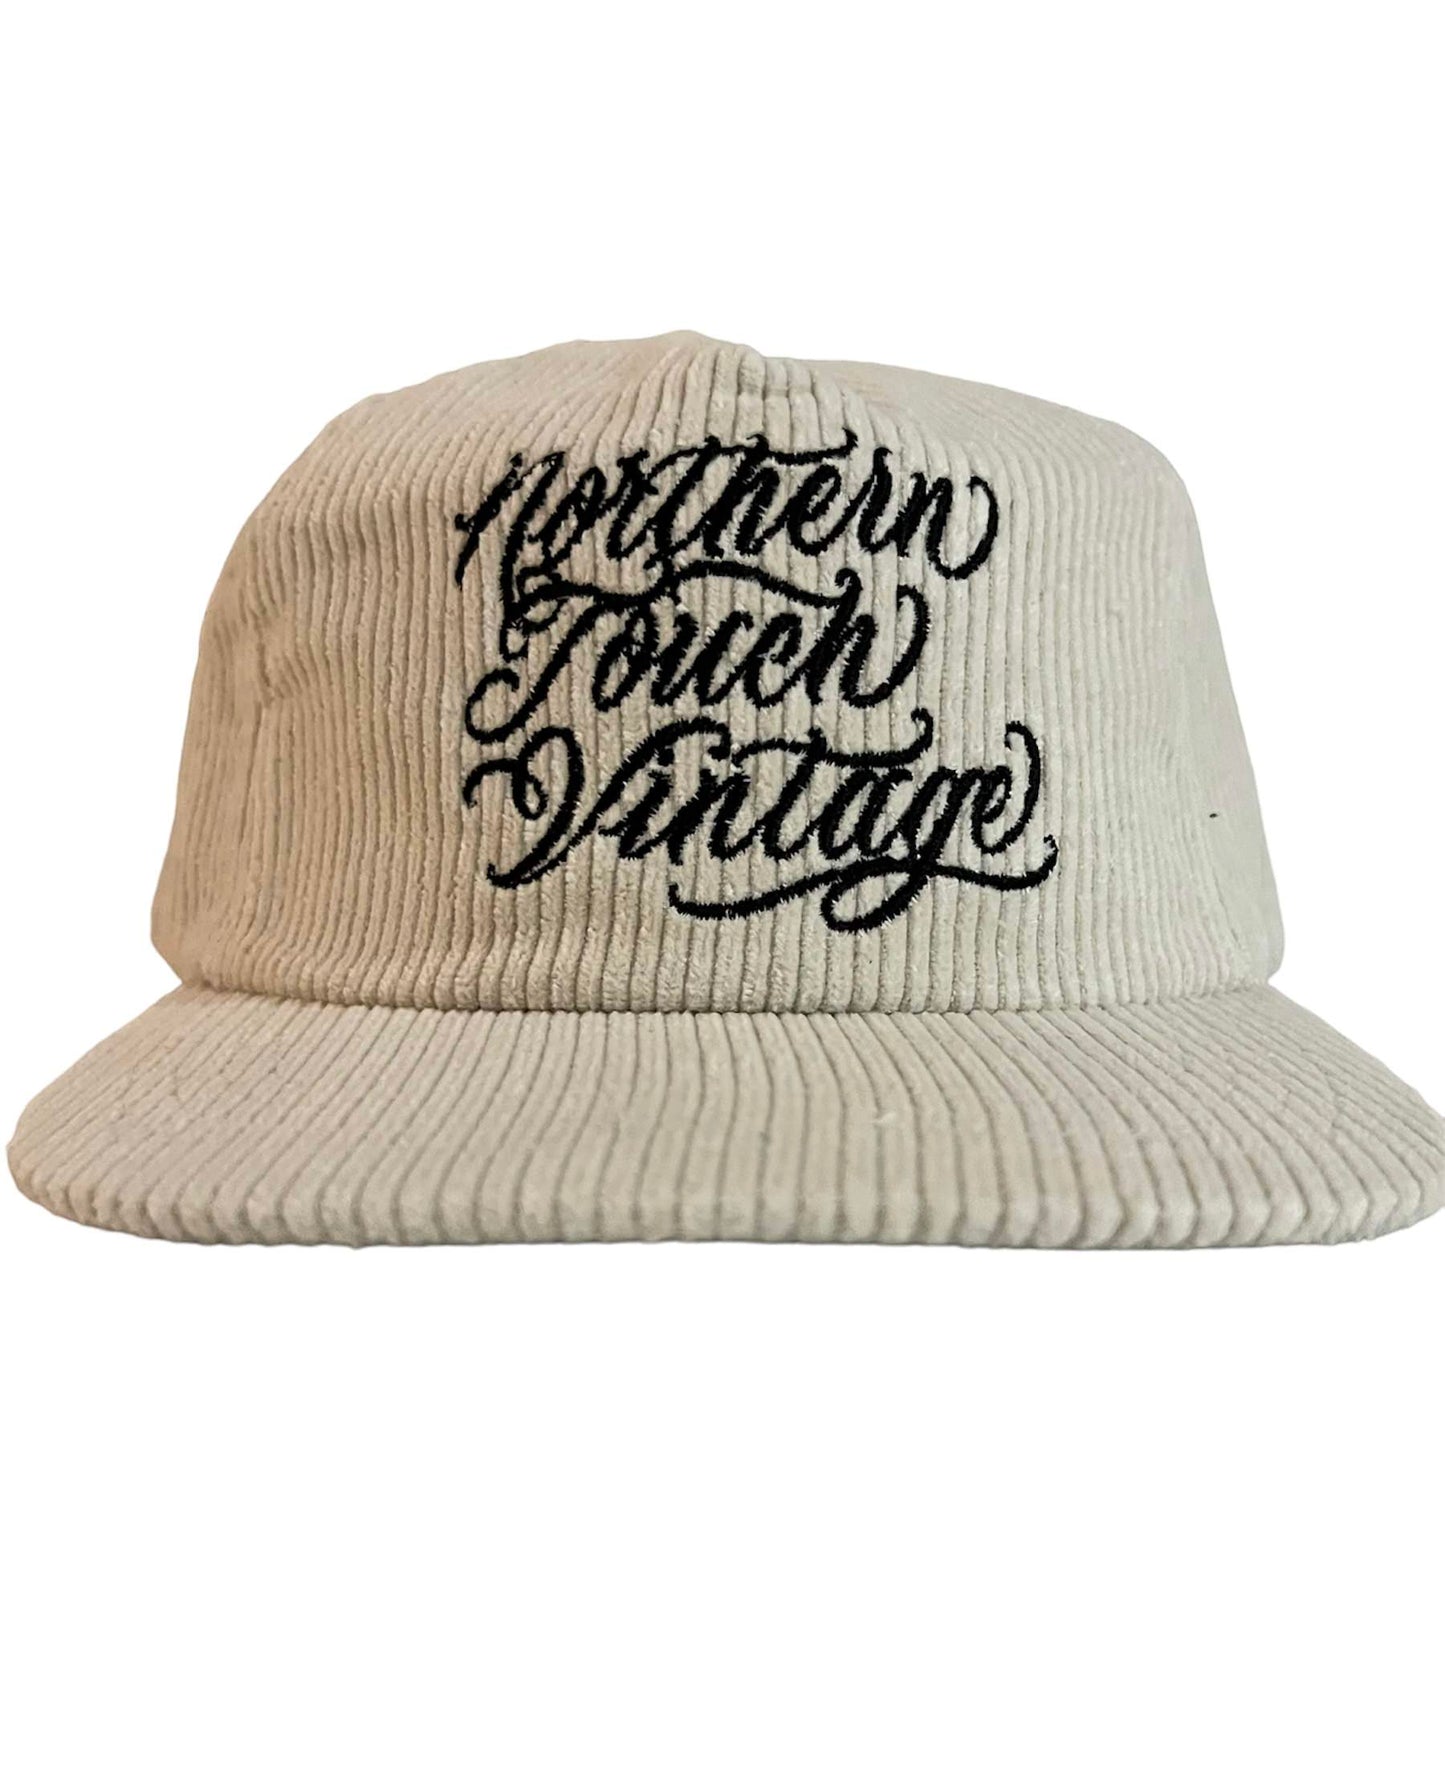 The Northern Touch Vintage Corduroy Hat